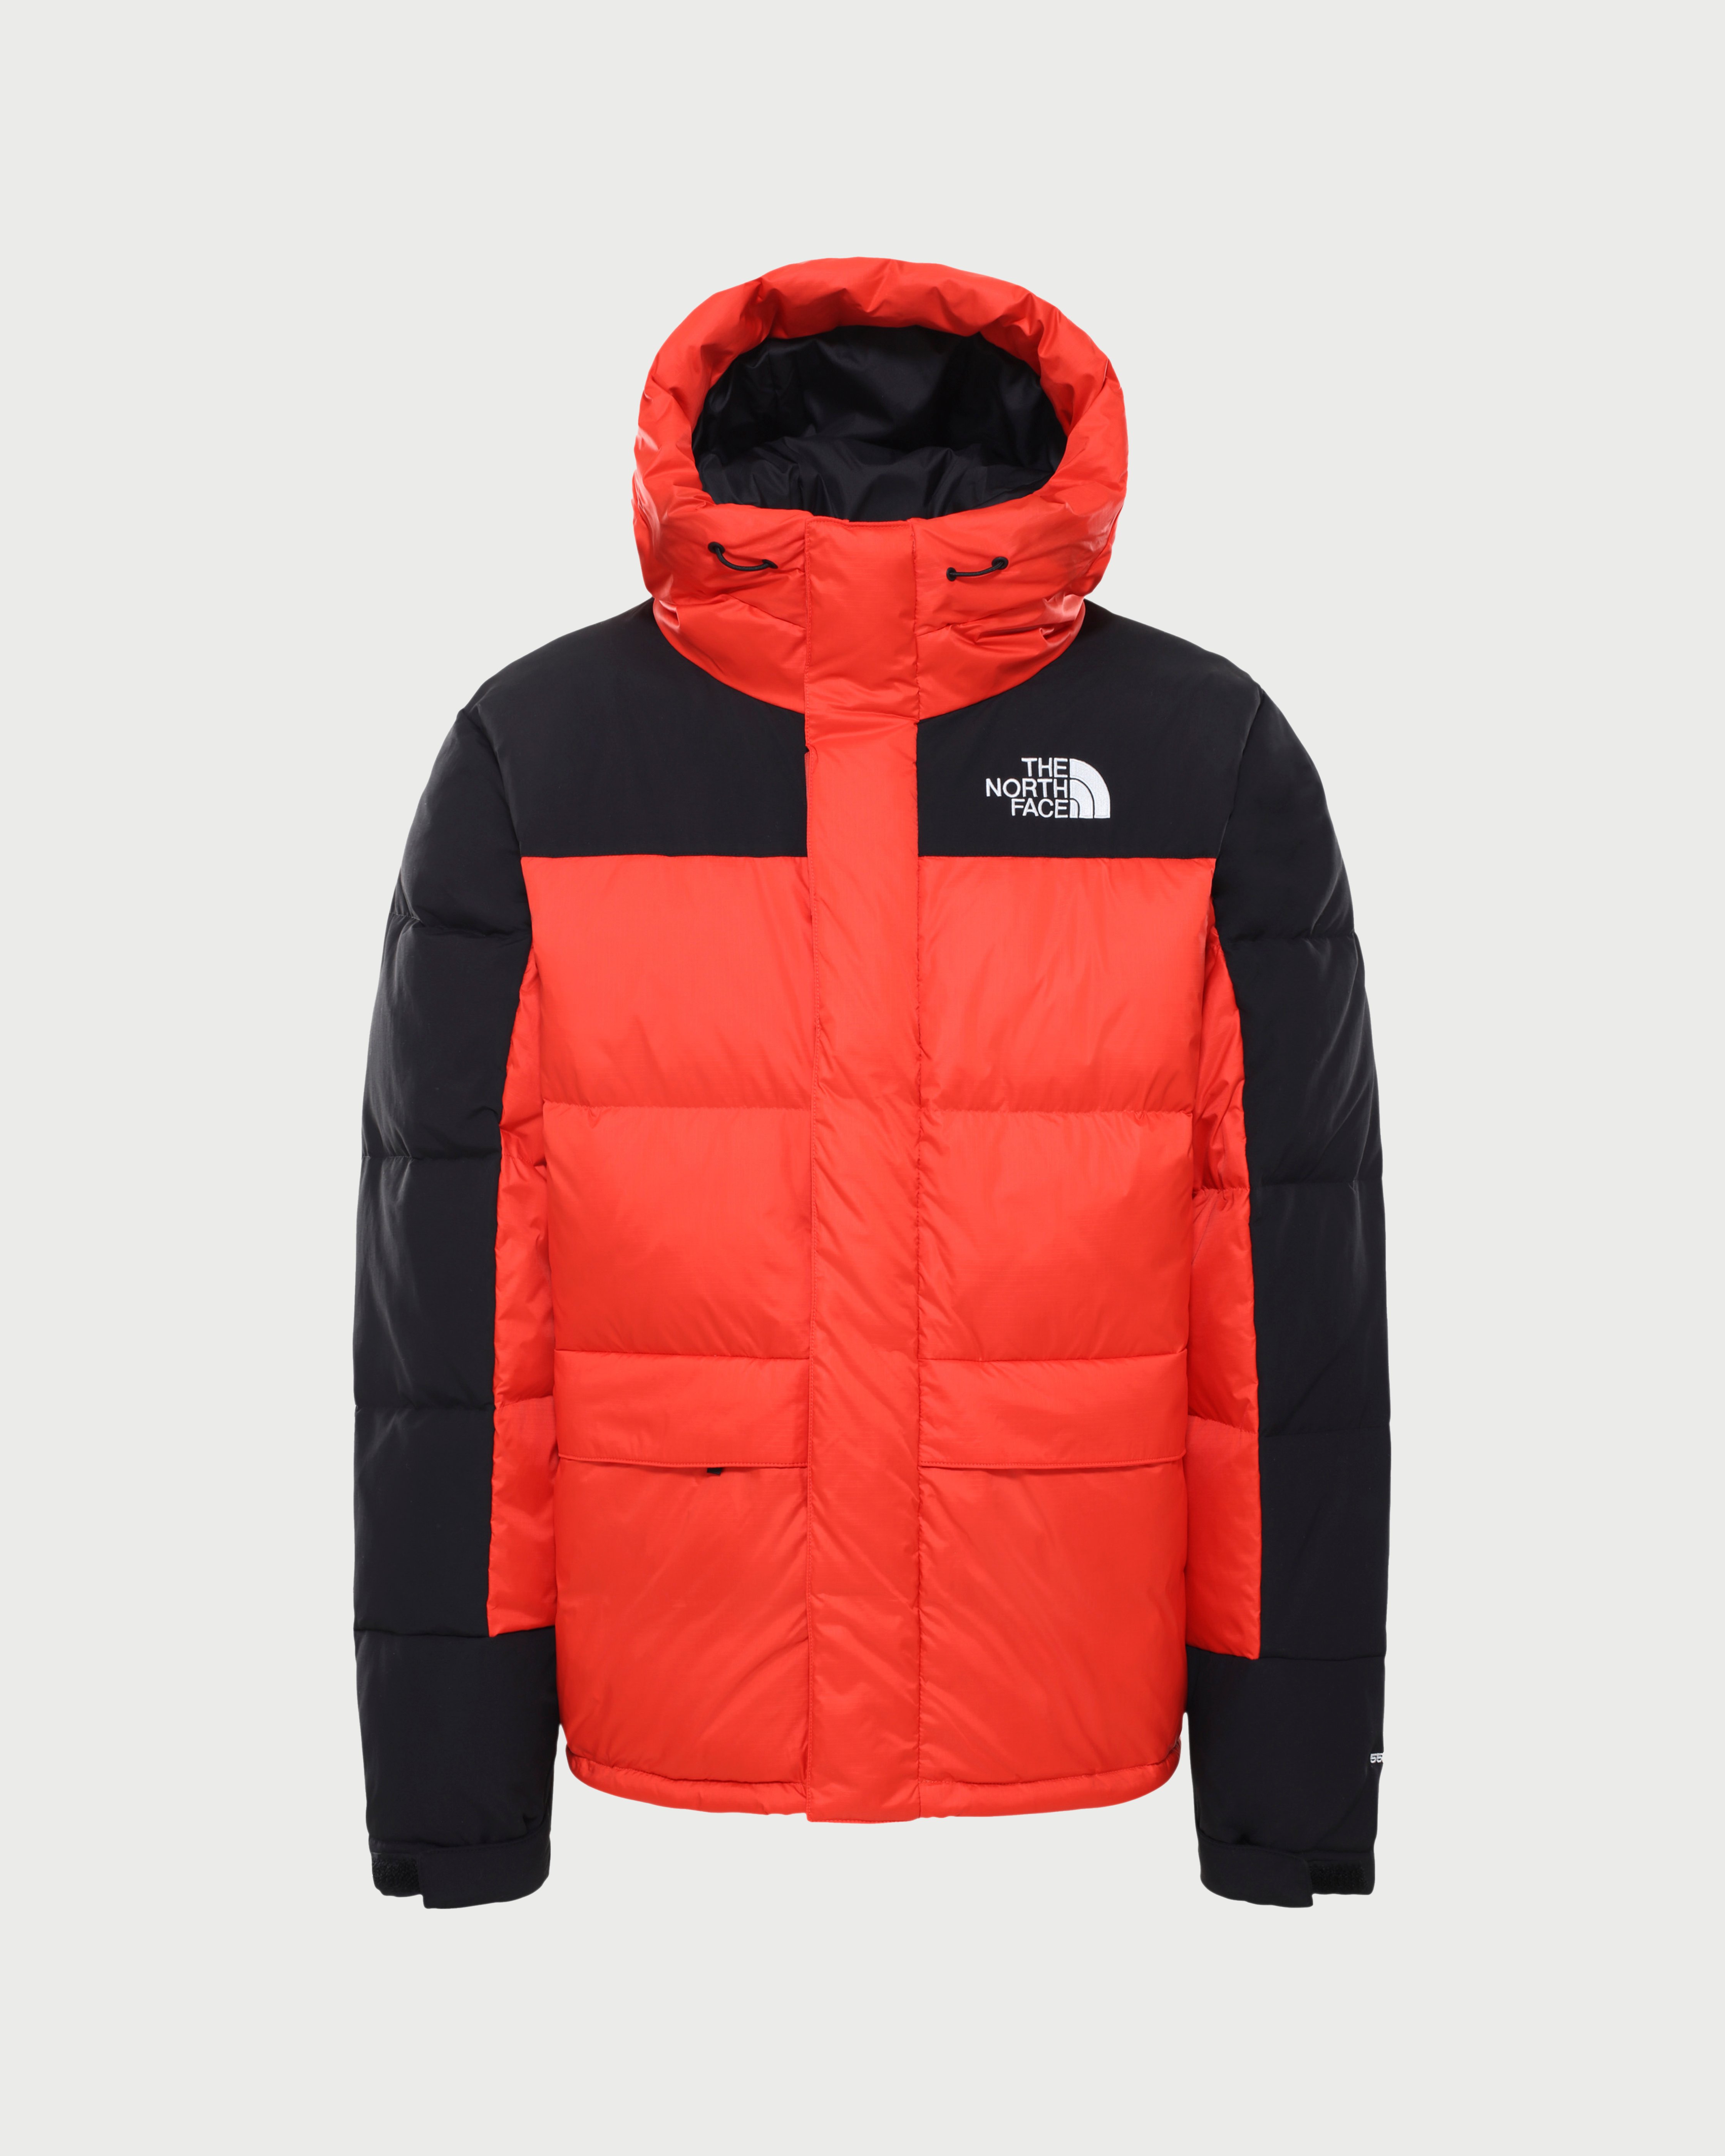 The North Face - Himalayan Down Jacket Peak Flare Unisex - Clothing - Red - Image 1